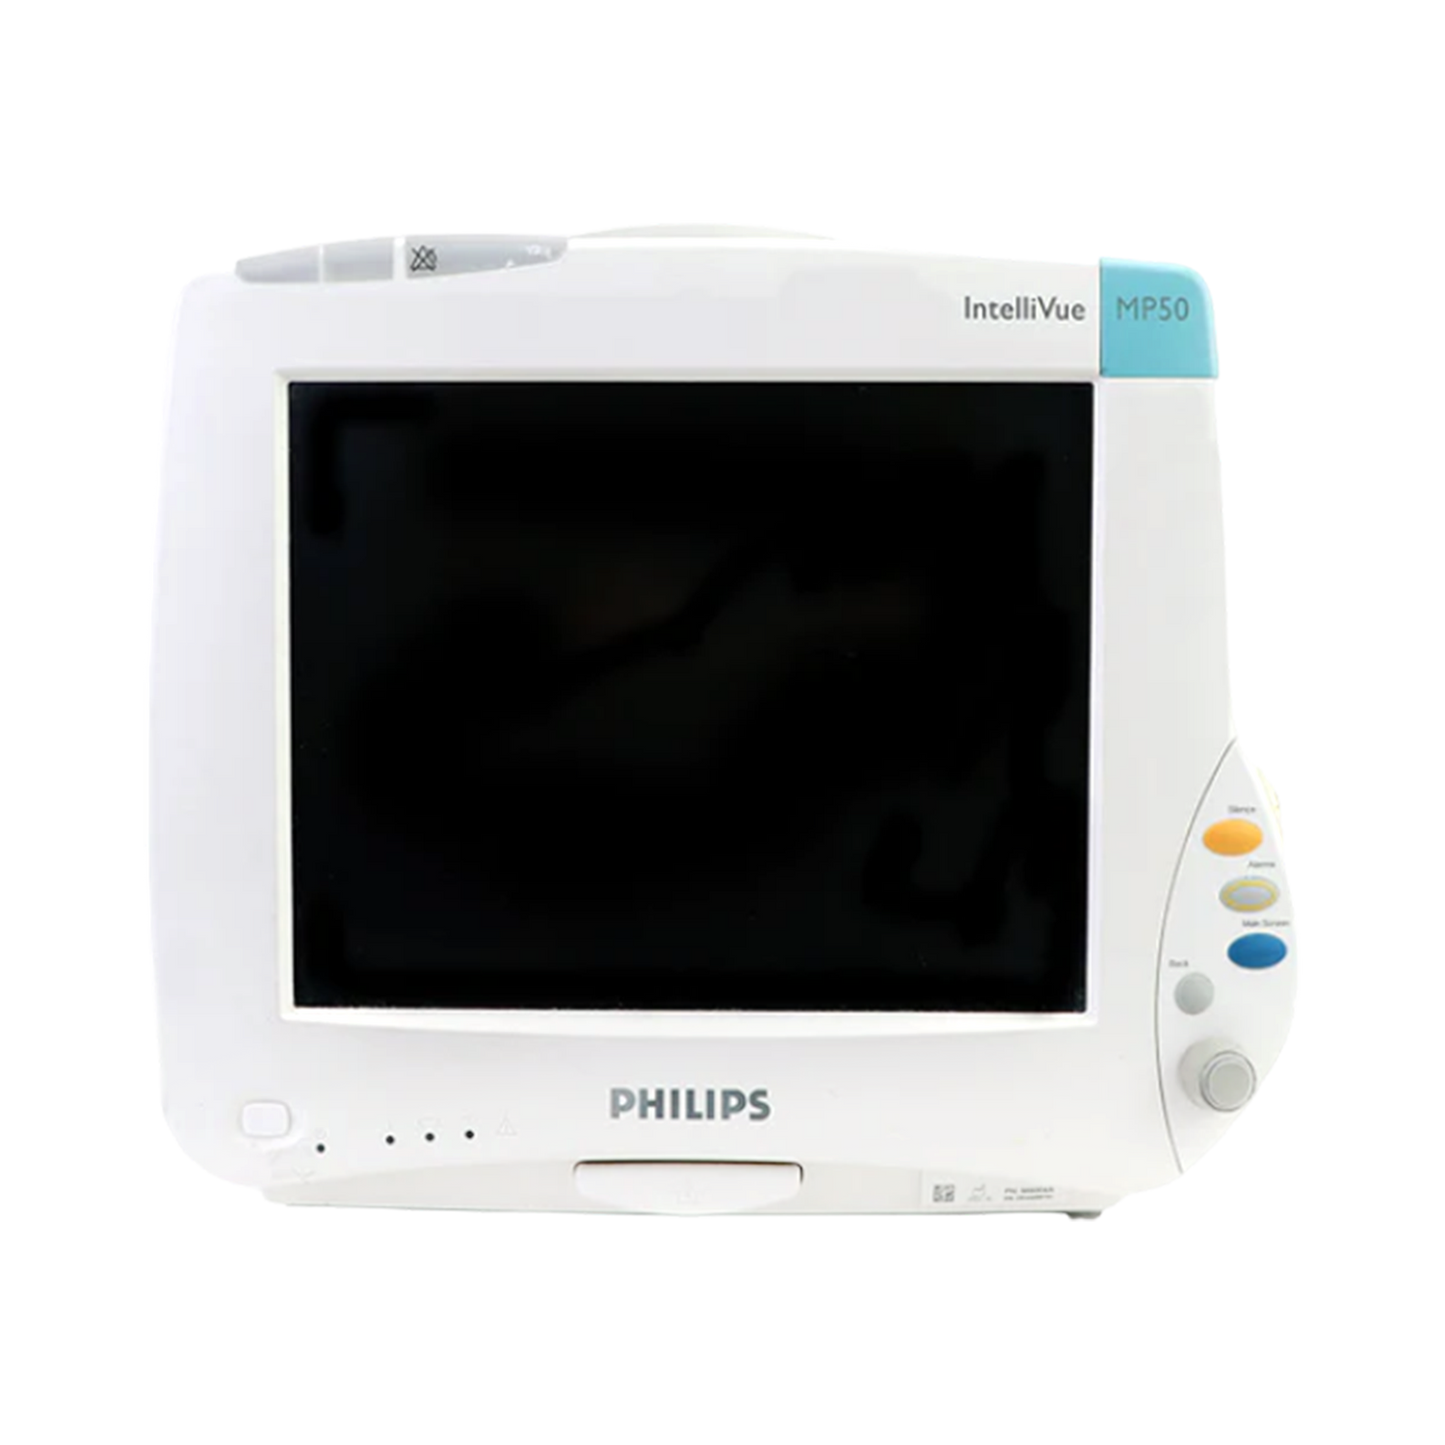 Philips Intellivue MP50 M8004A Patient Monitor